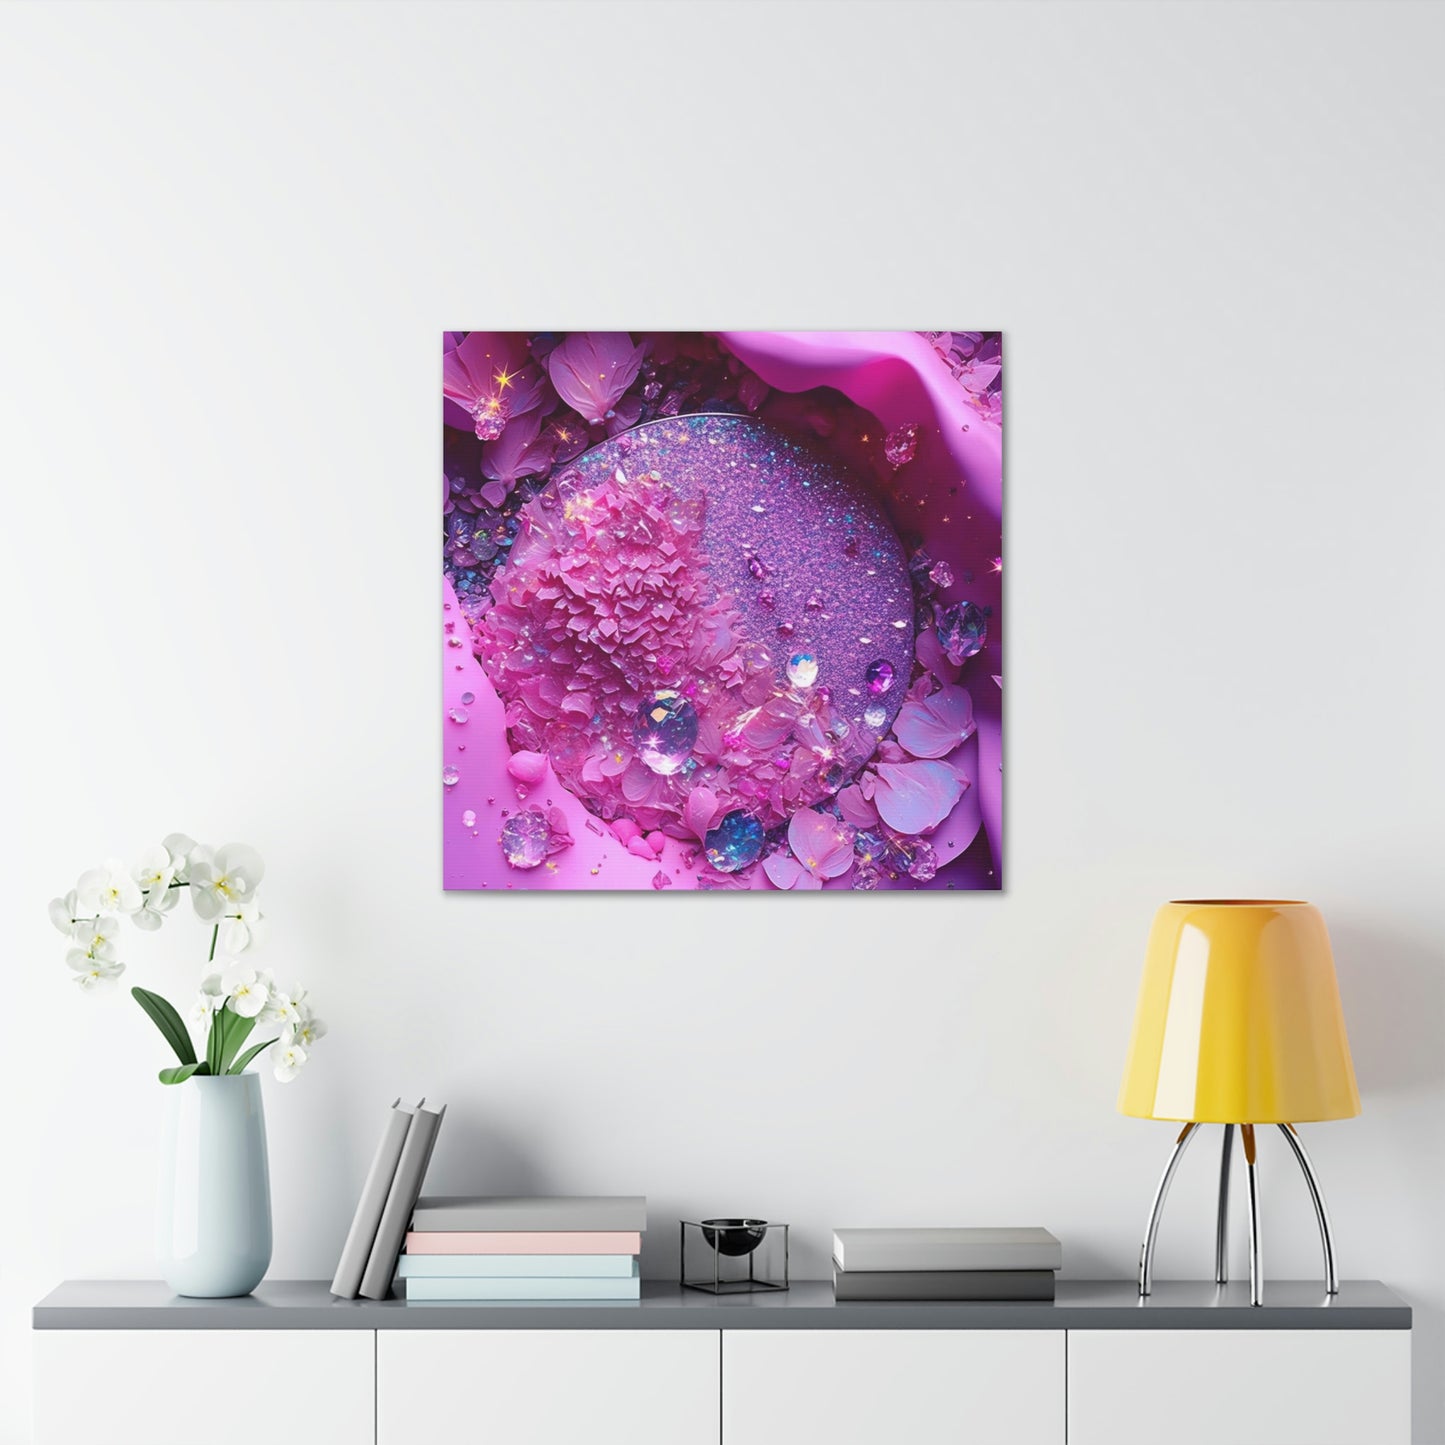 Pink Dimond Power rose abstract